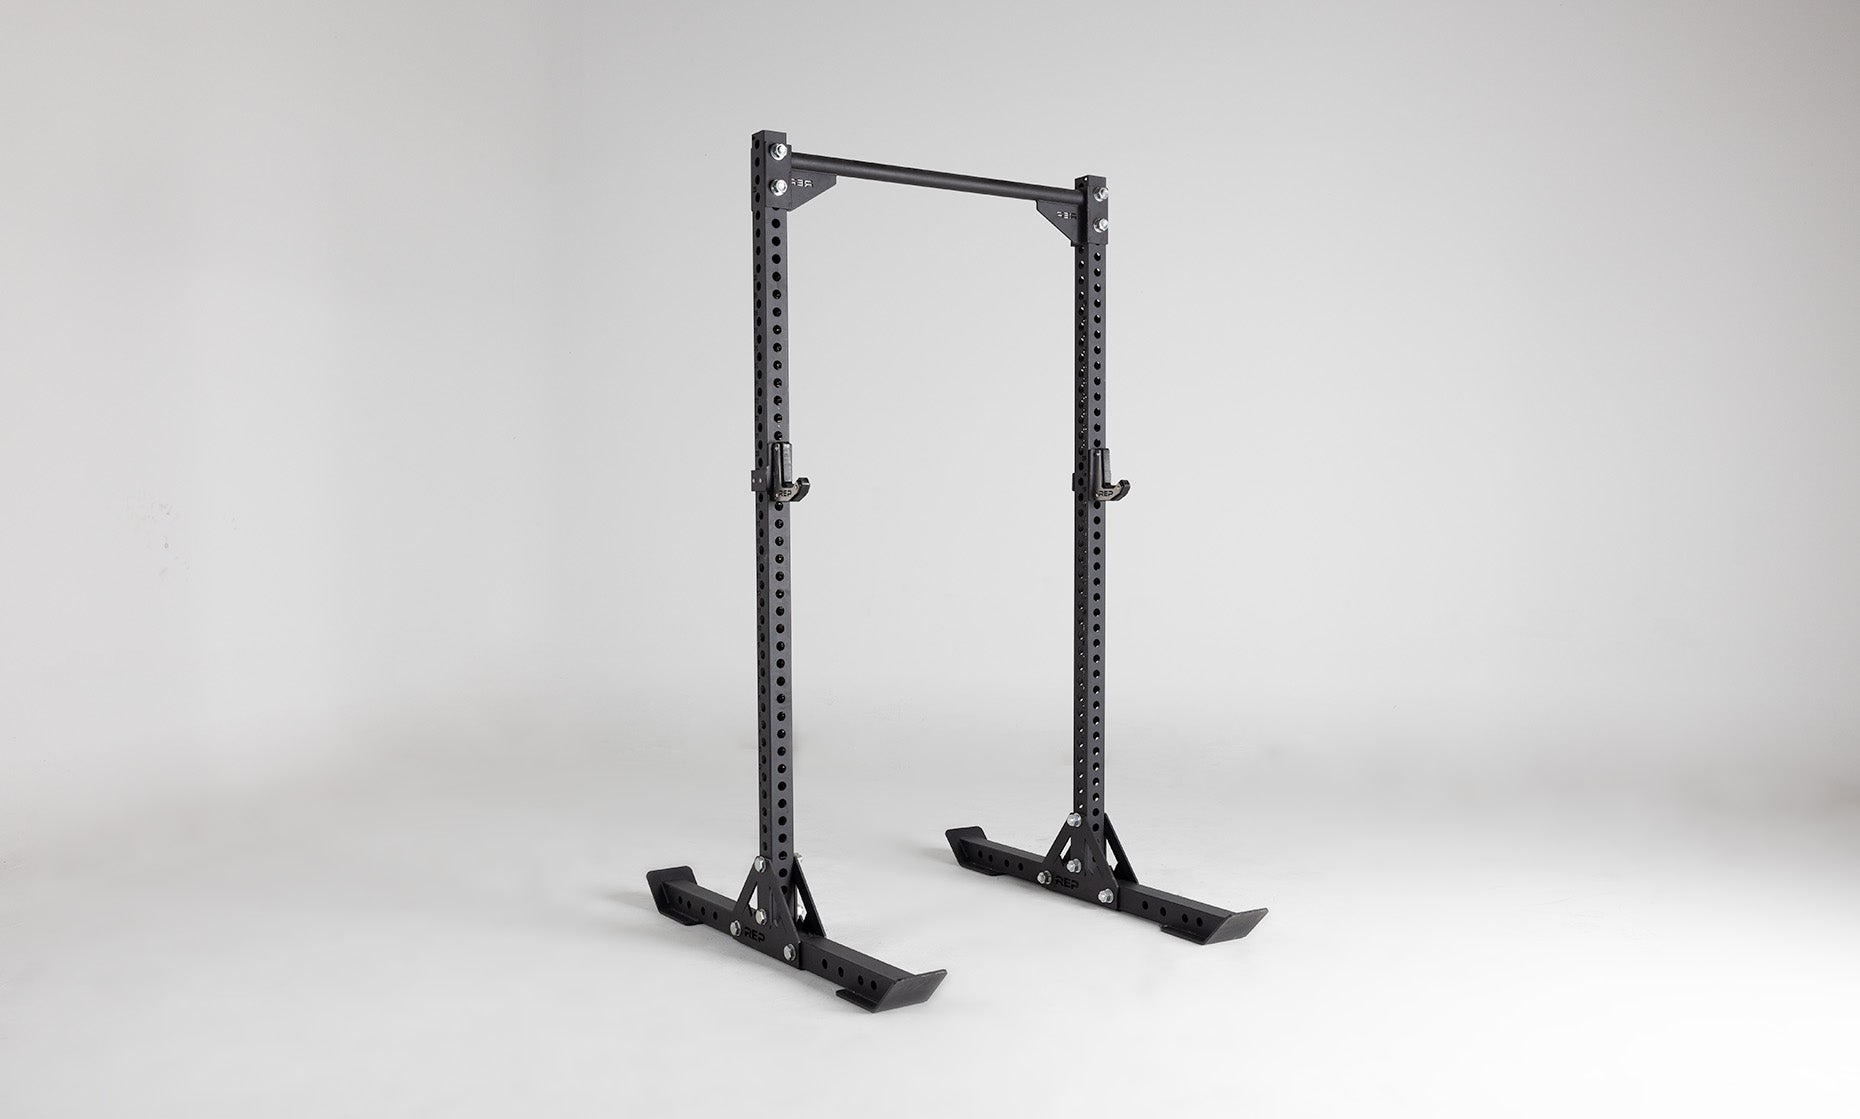 Oxylus Yoke With Pull-Up Bar